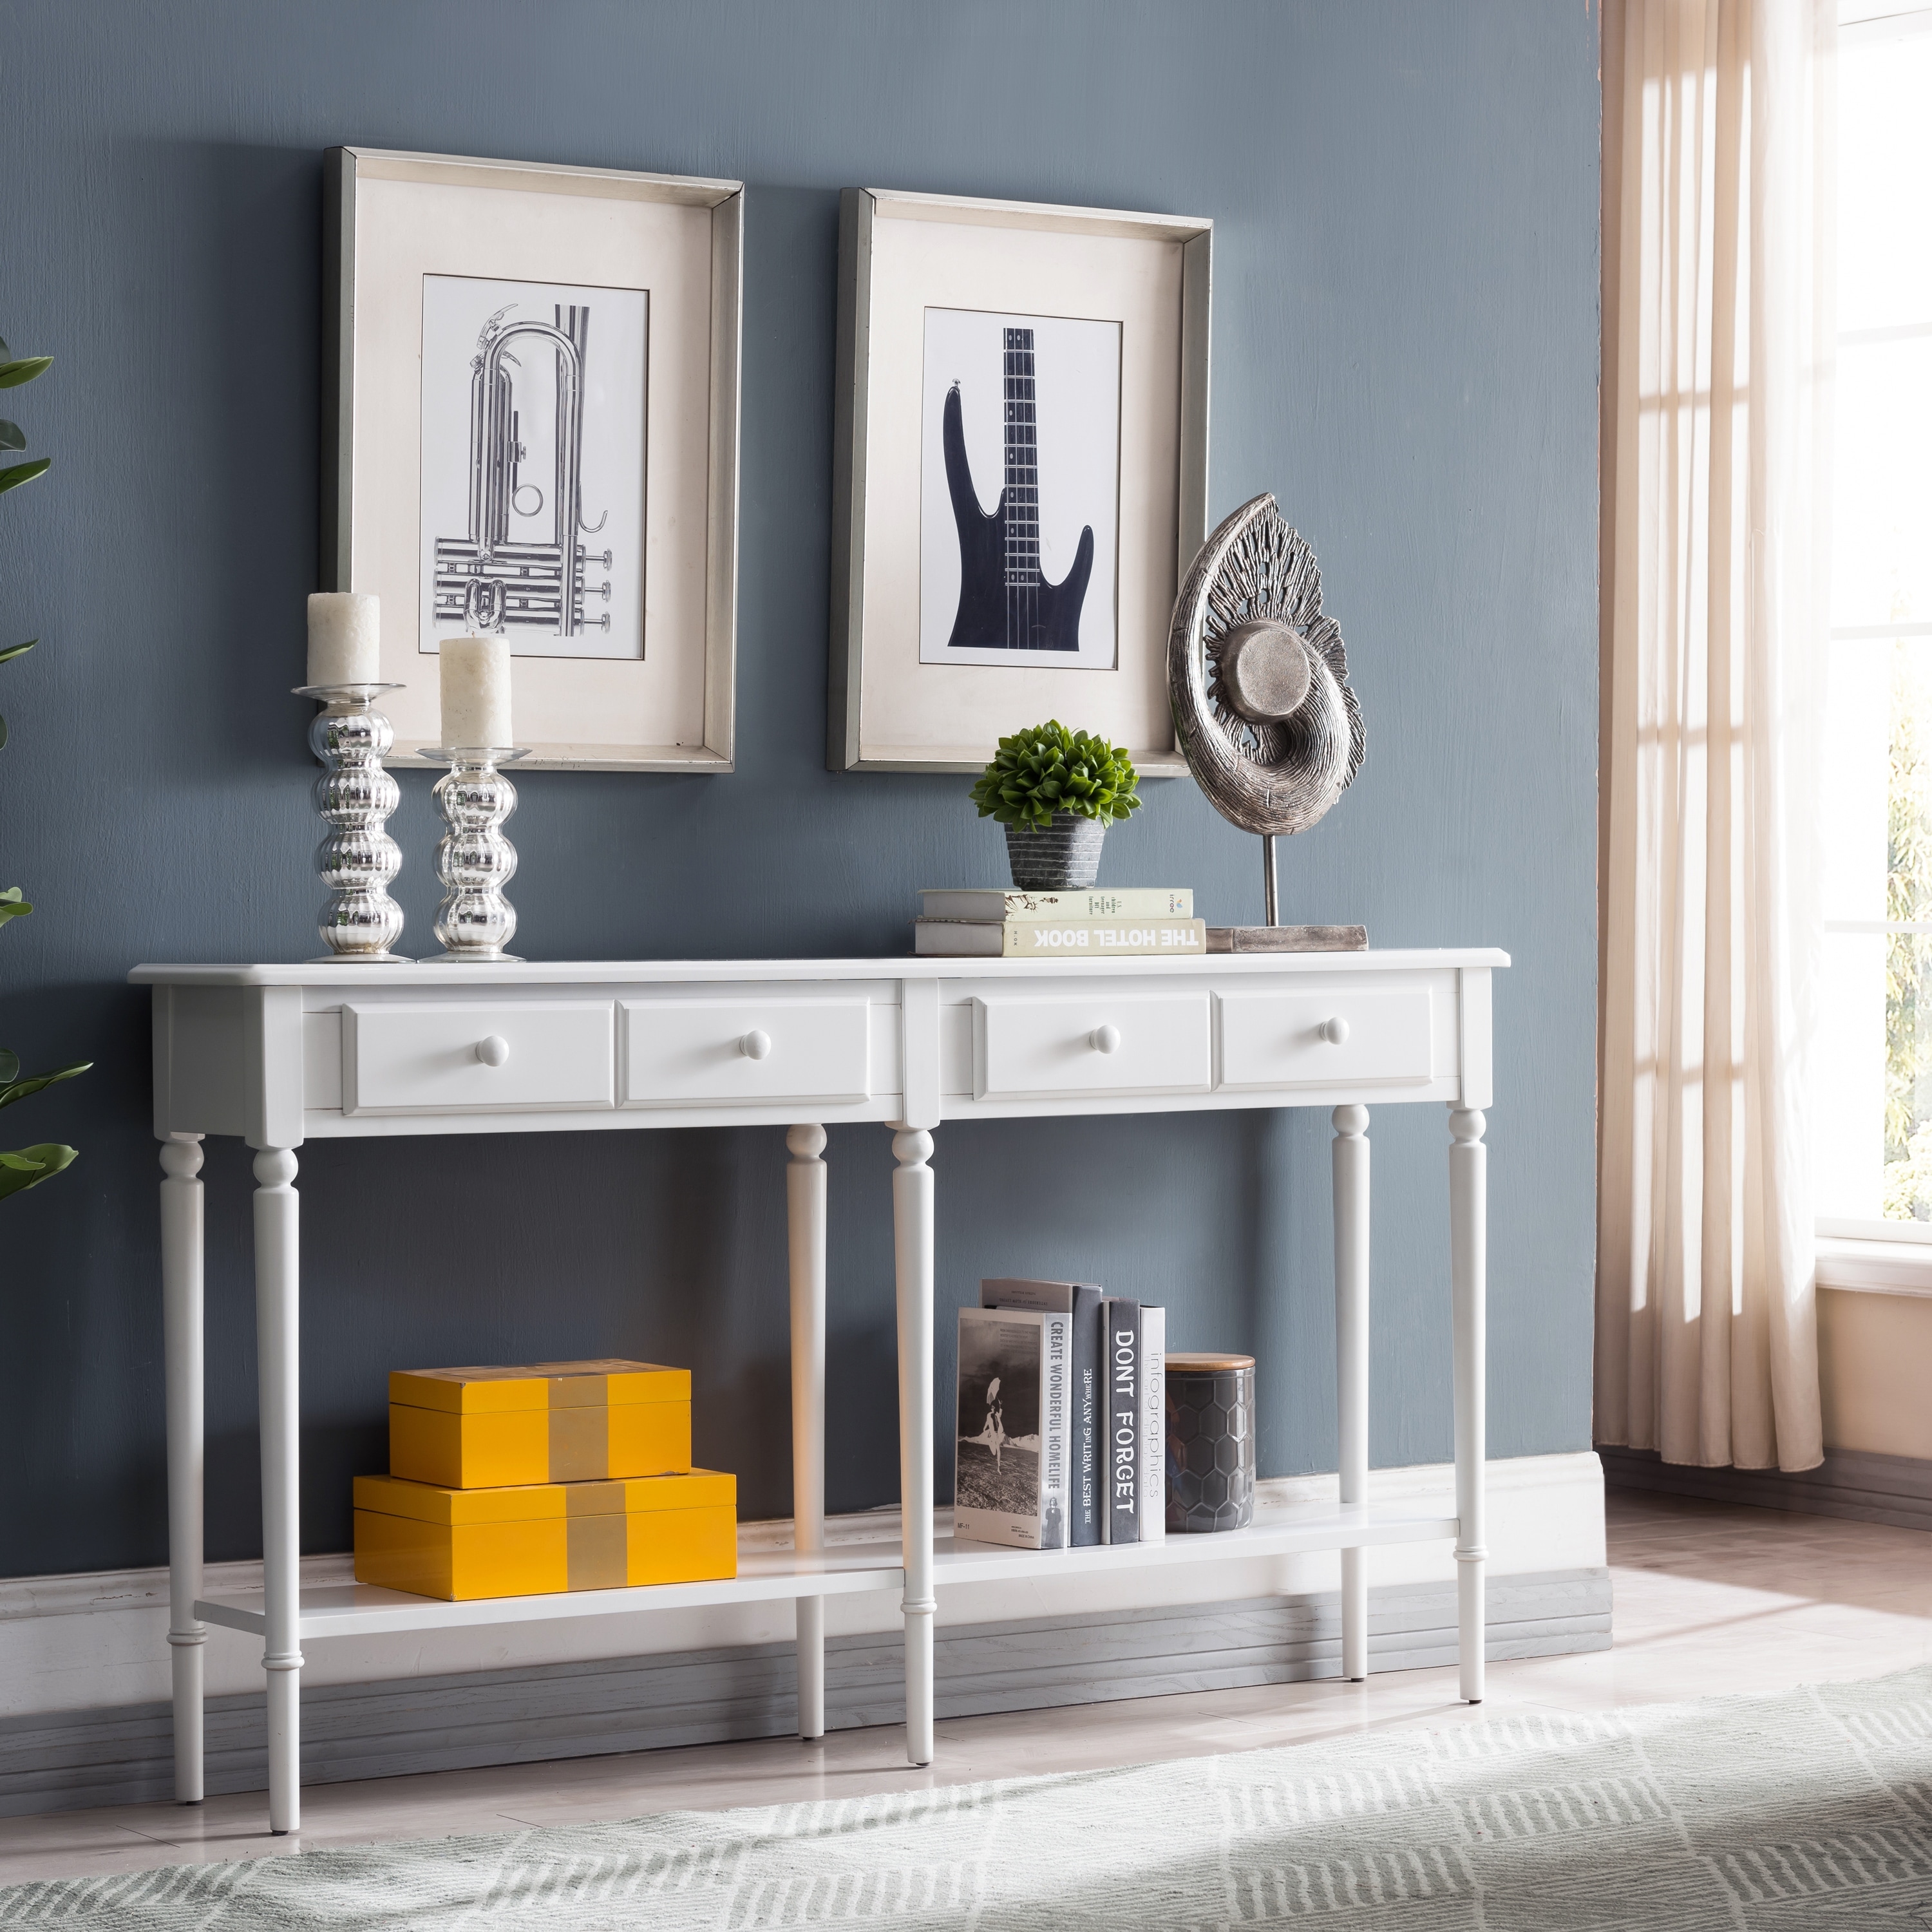 Double Hall Console Sofa Table With Display Shelf Overstock 32293012 White